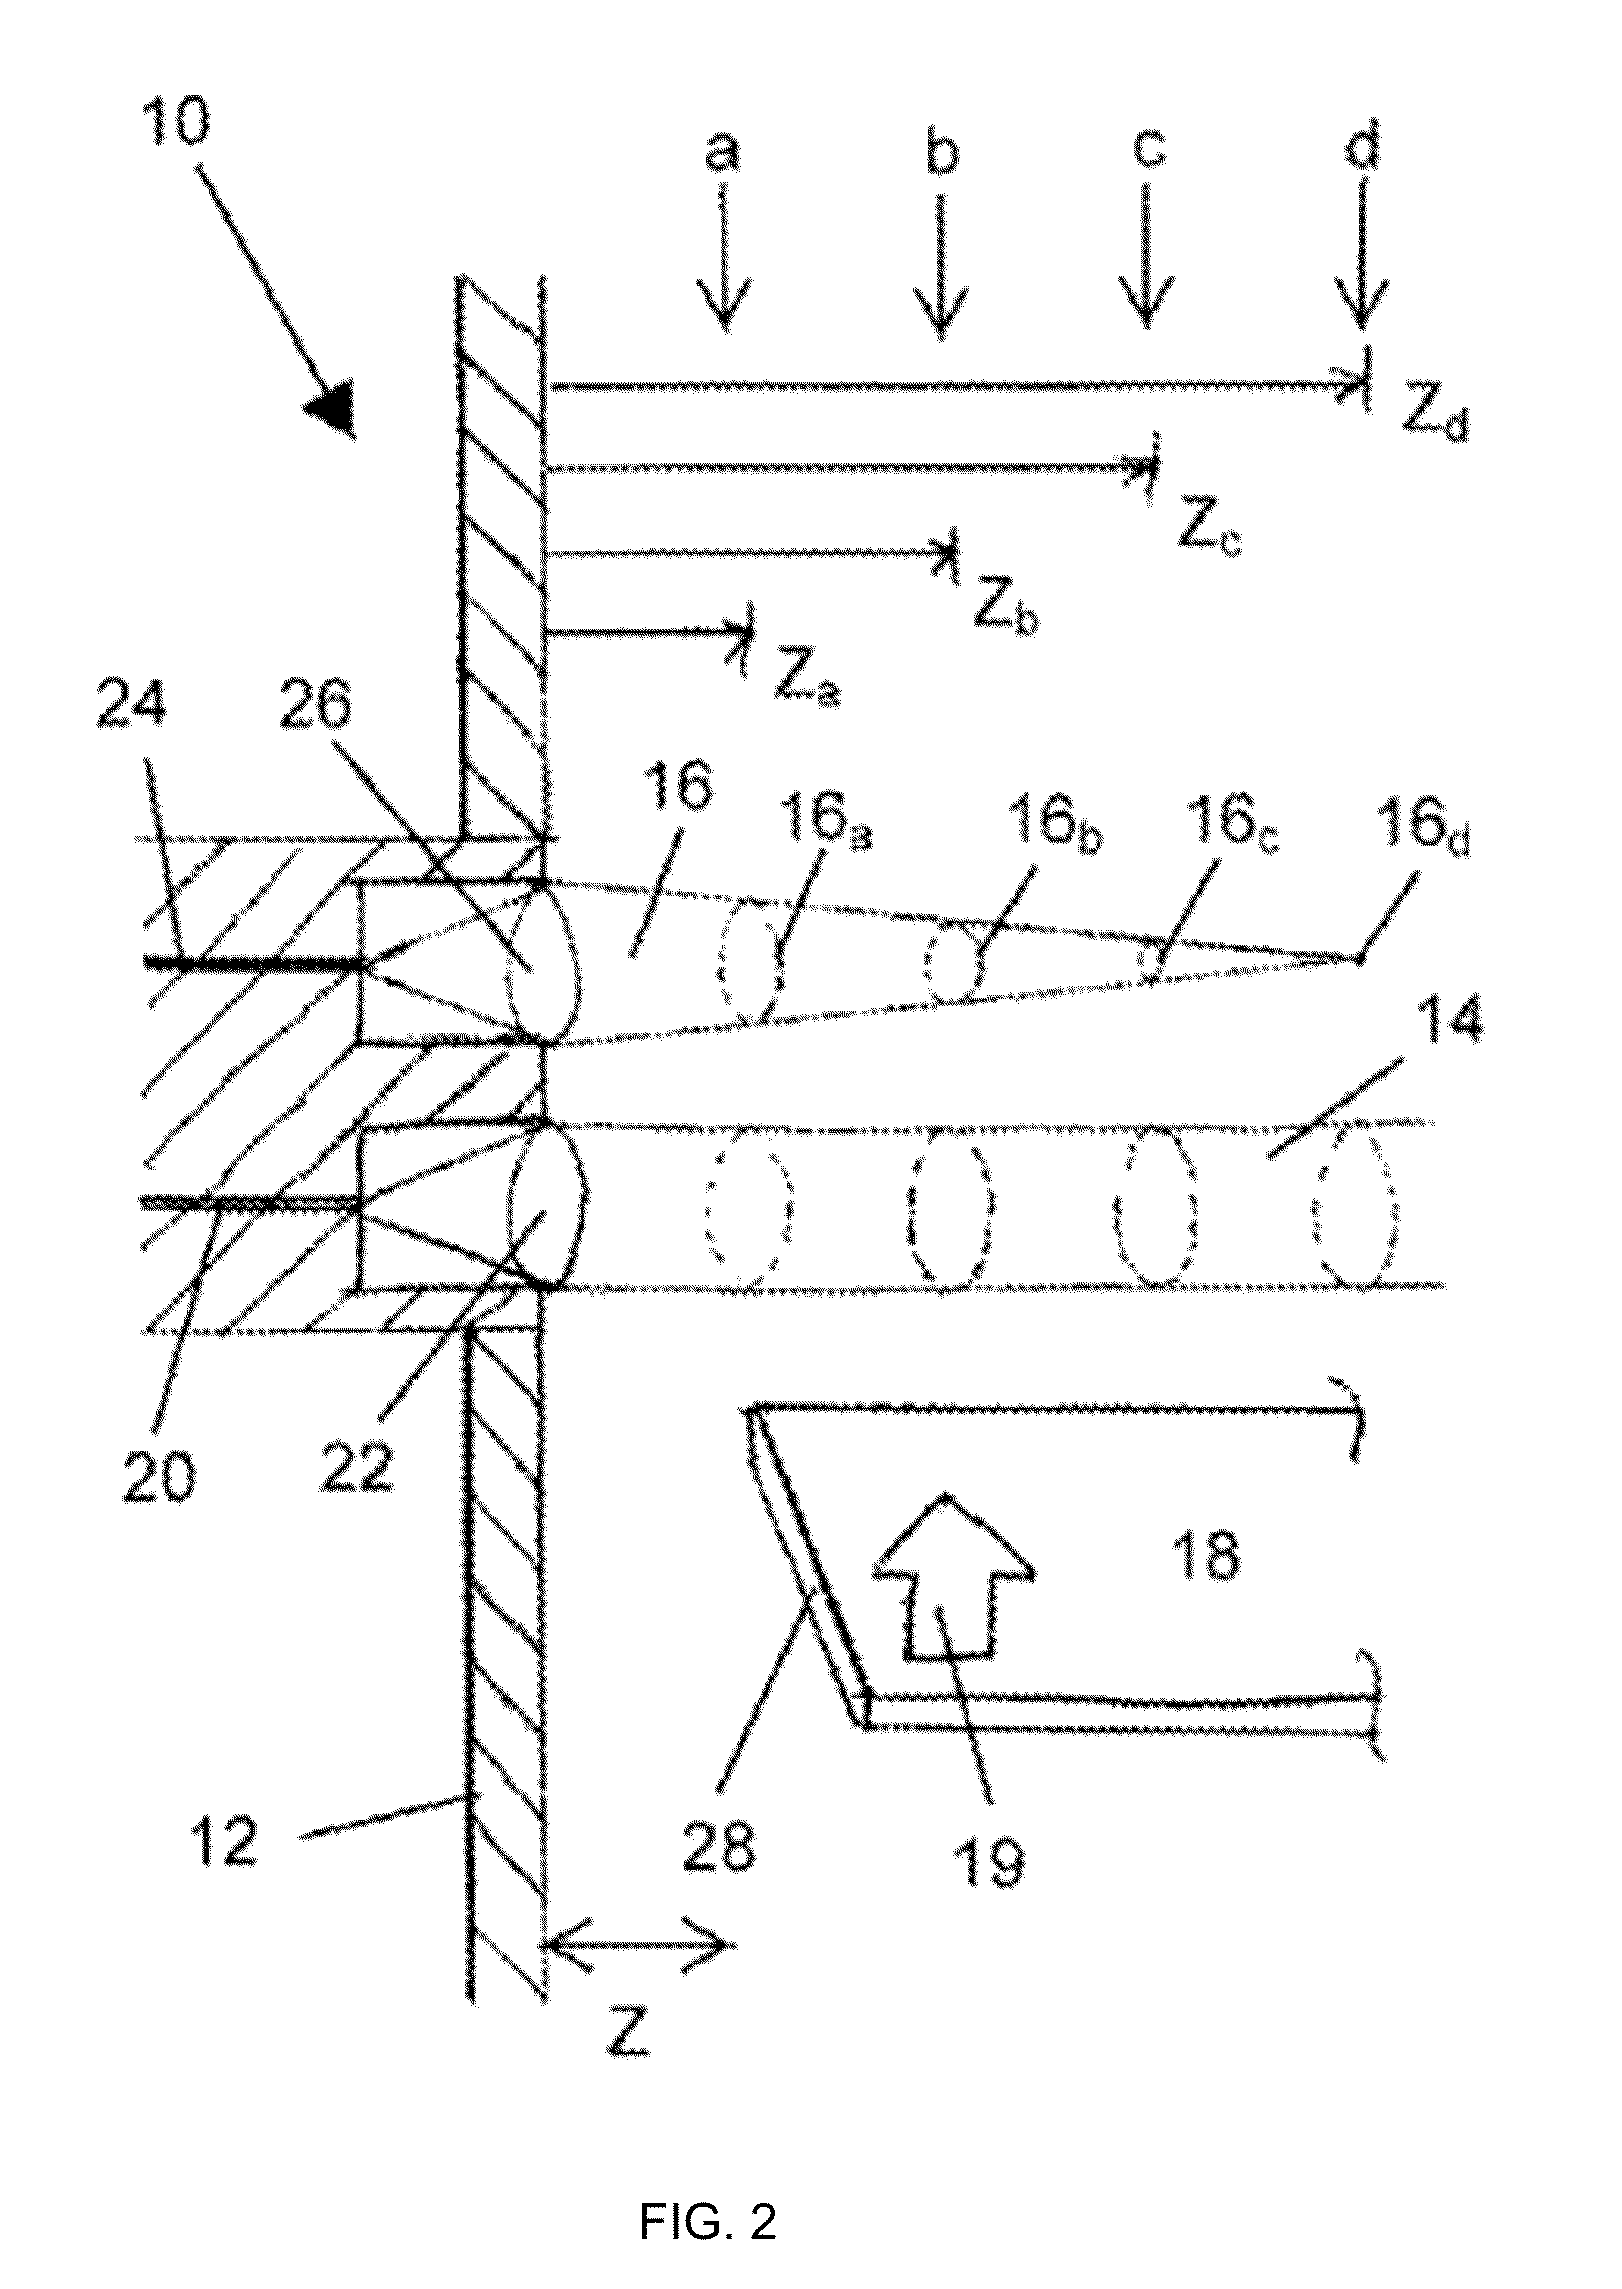 Method for detecting foreign object damage in turbomachinery